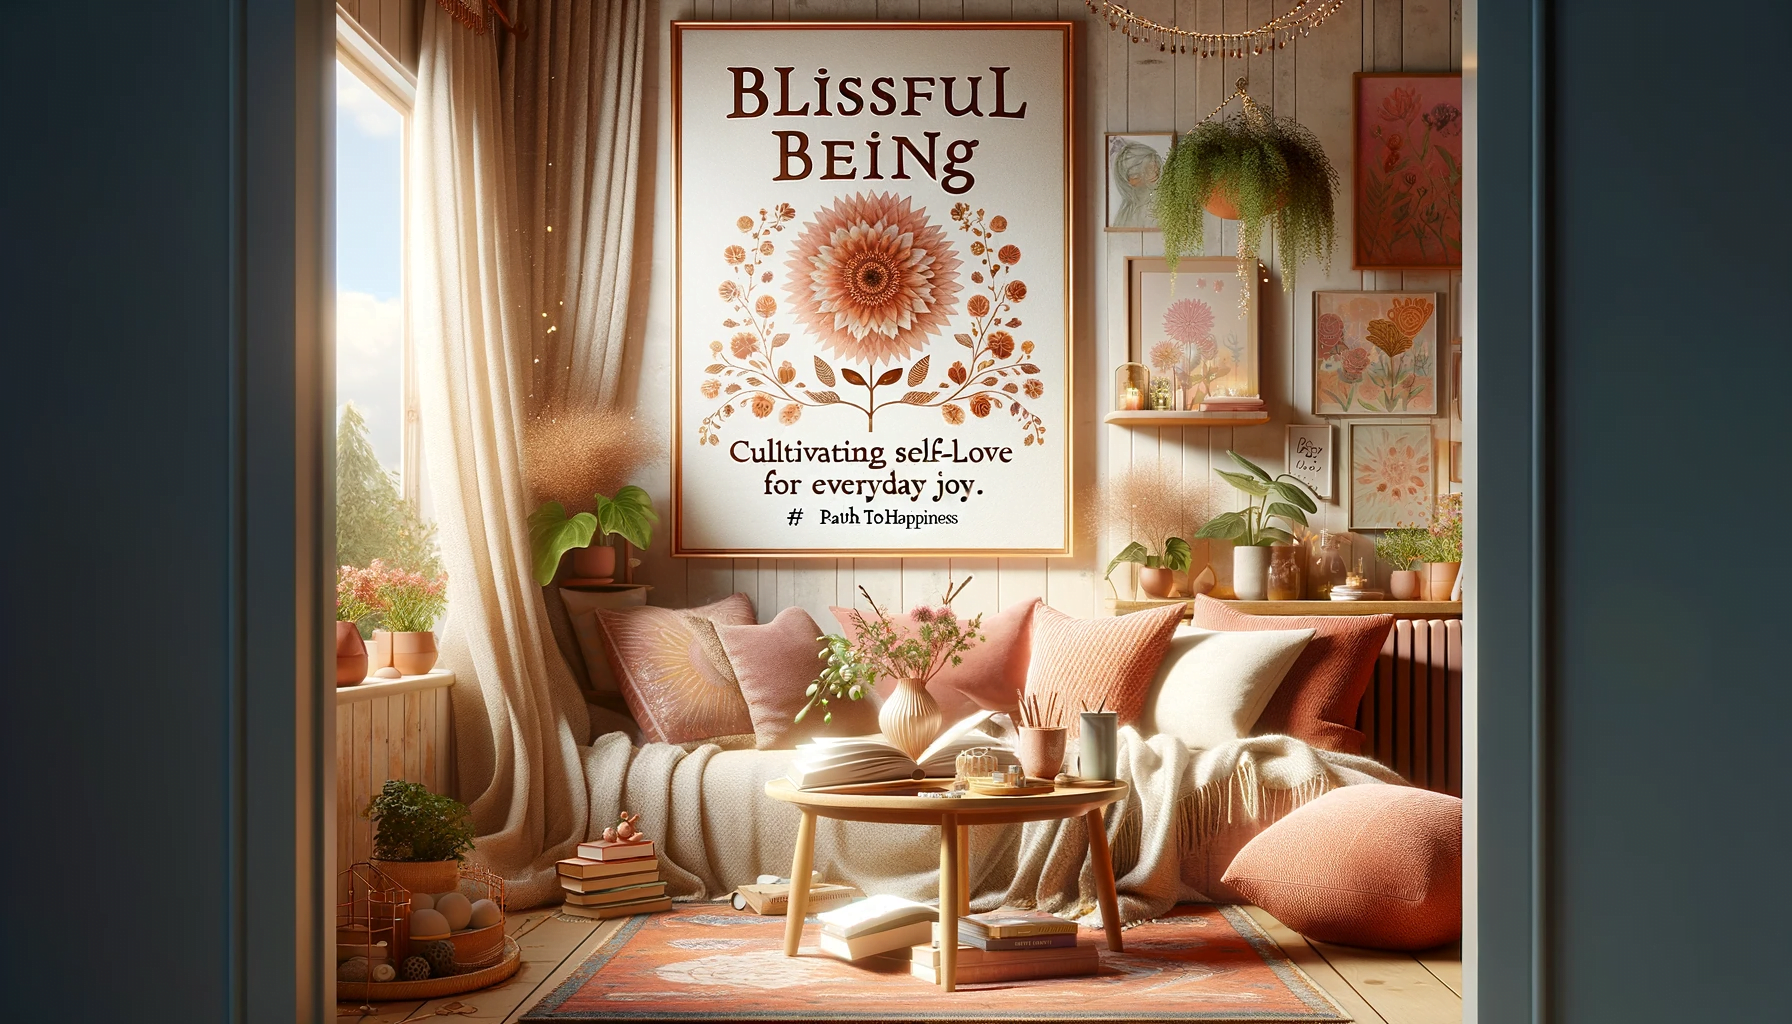 Blissful Being: Cultivating Self-Love for Everyday Joy